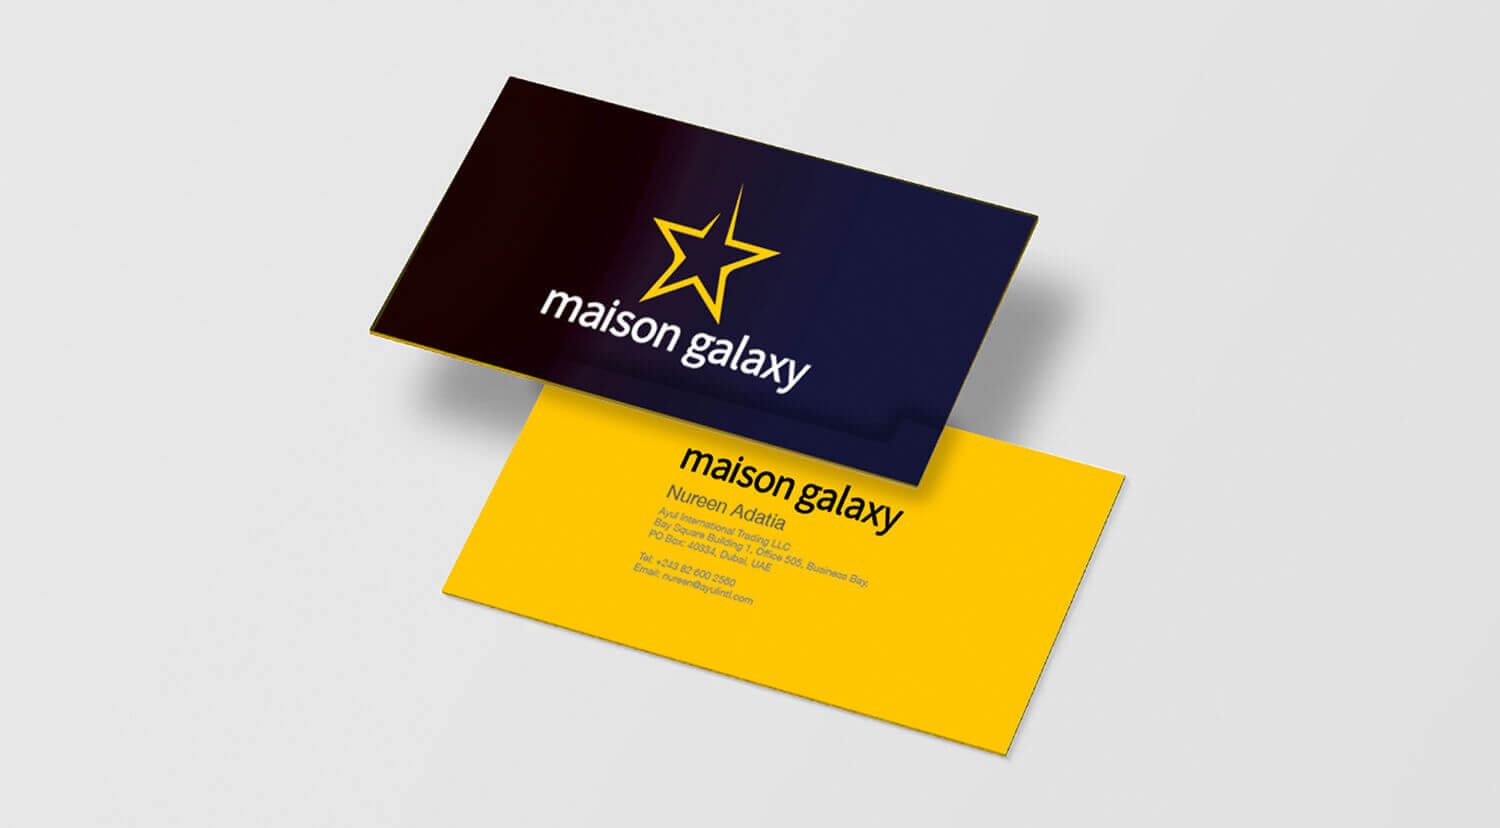 Maison Galaxy, Business Card Branding and Graphic Communications Branding - Campbell Rigg Agency